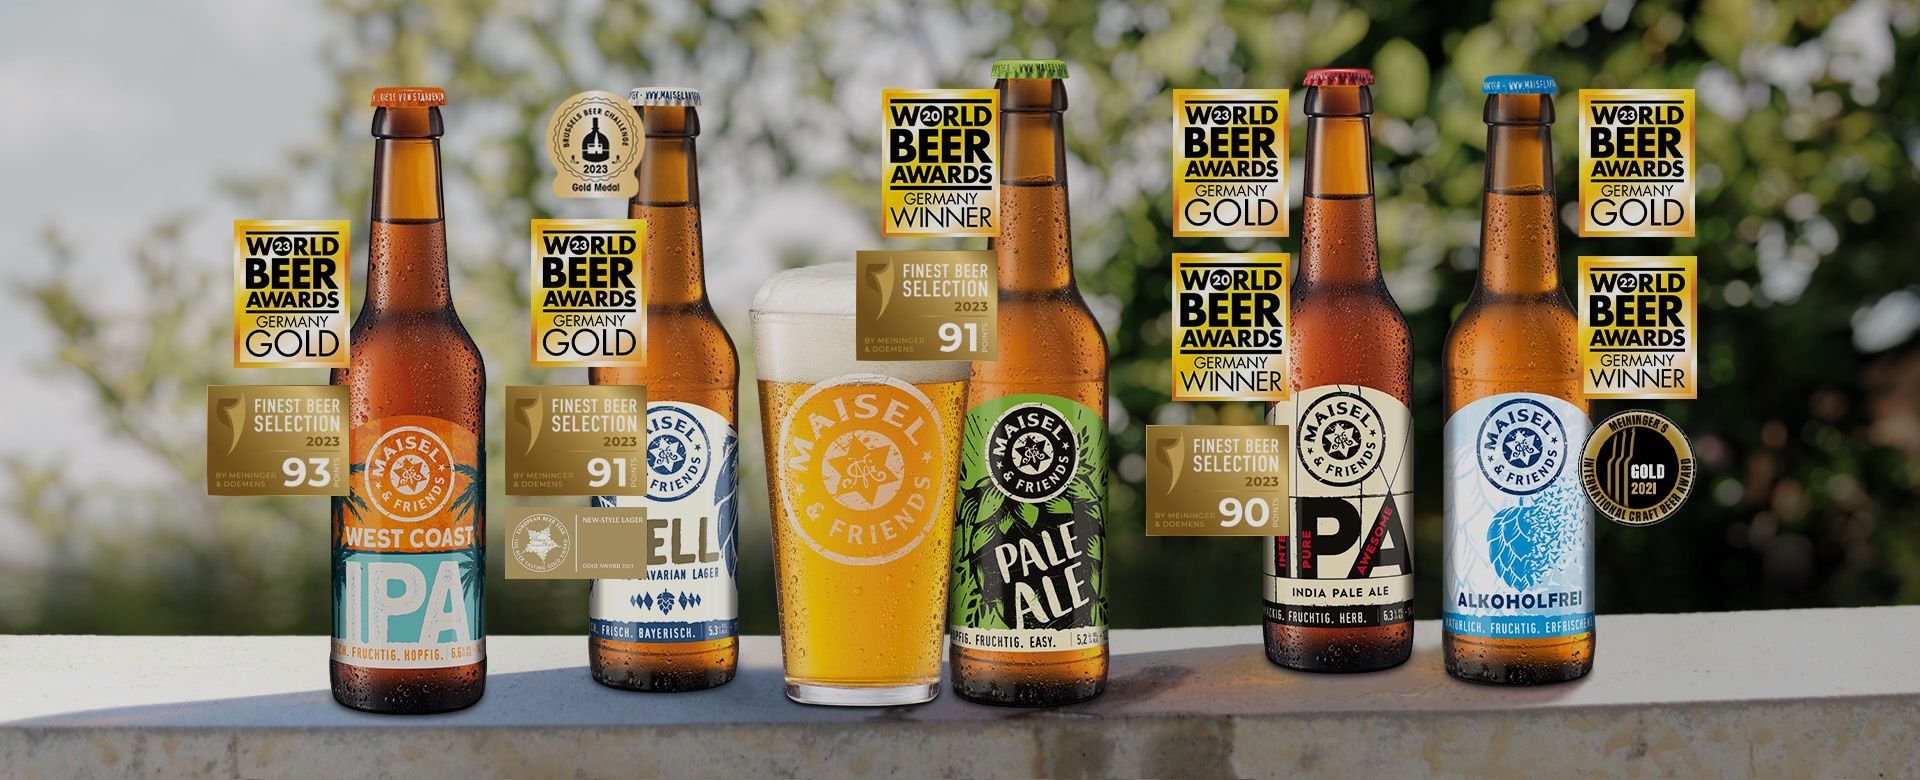 A range of Maisel beers and their respective Awards that they received over the years.